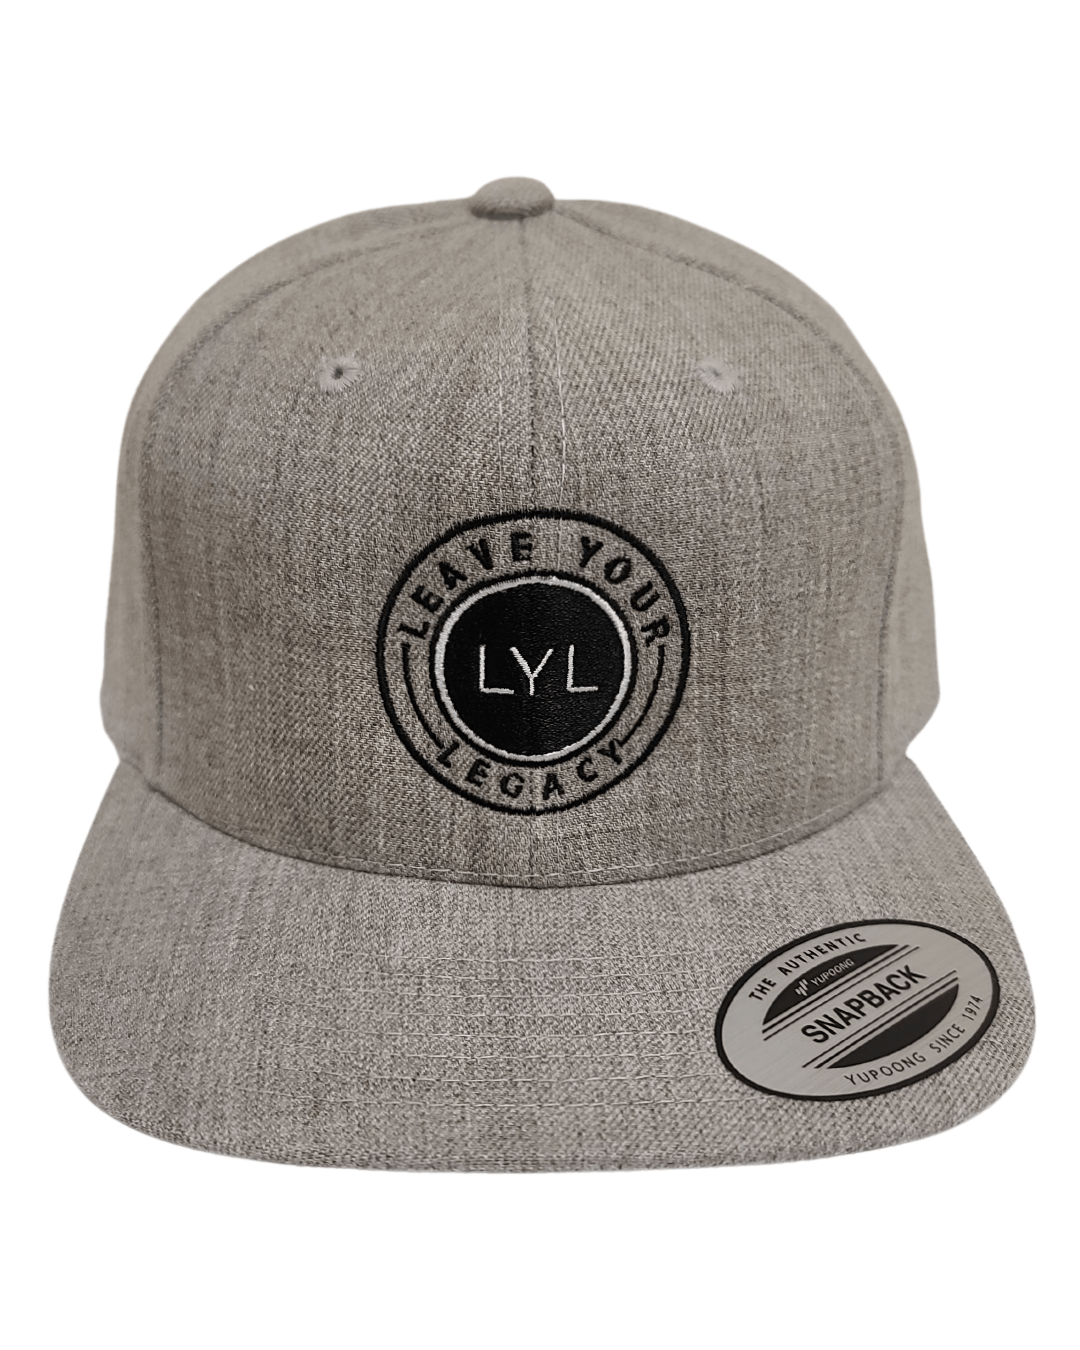 LyL Bullet - Leave Your Legacy Clothing